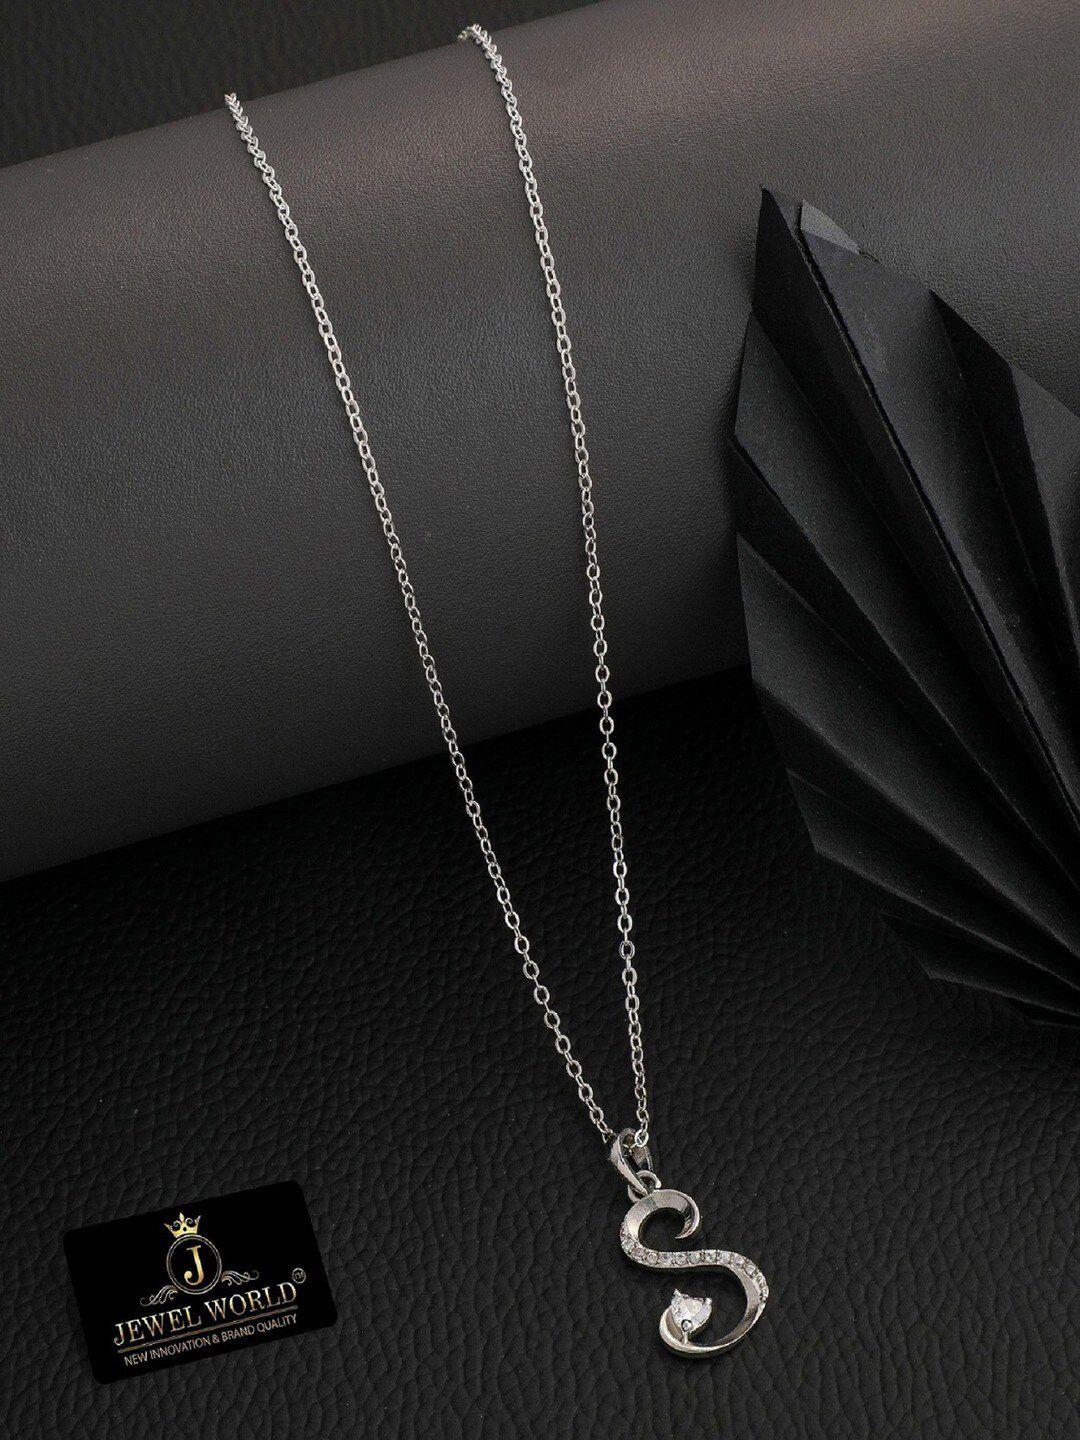 jewel world silver-plated s letter stone studded necklace